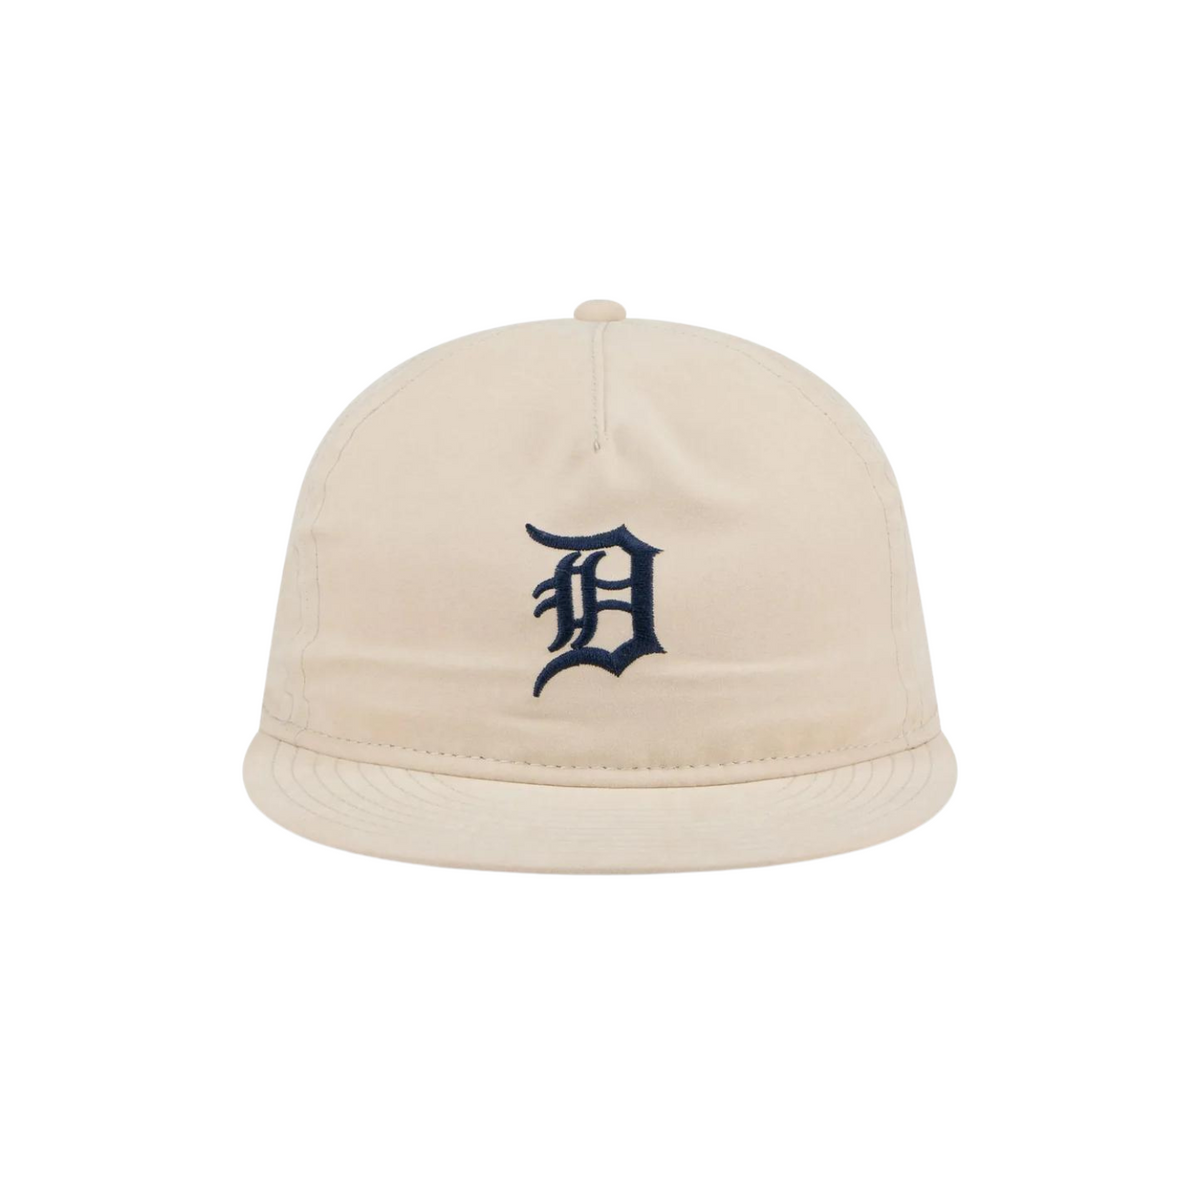 BRUSHED NYLON 9FIFTY RETRO CROWN A-FRAME - DETROIT TIGERS (STONE)